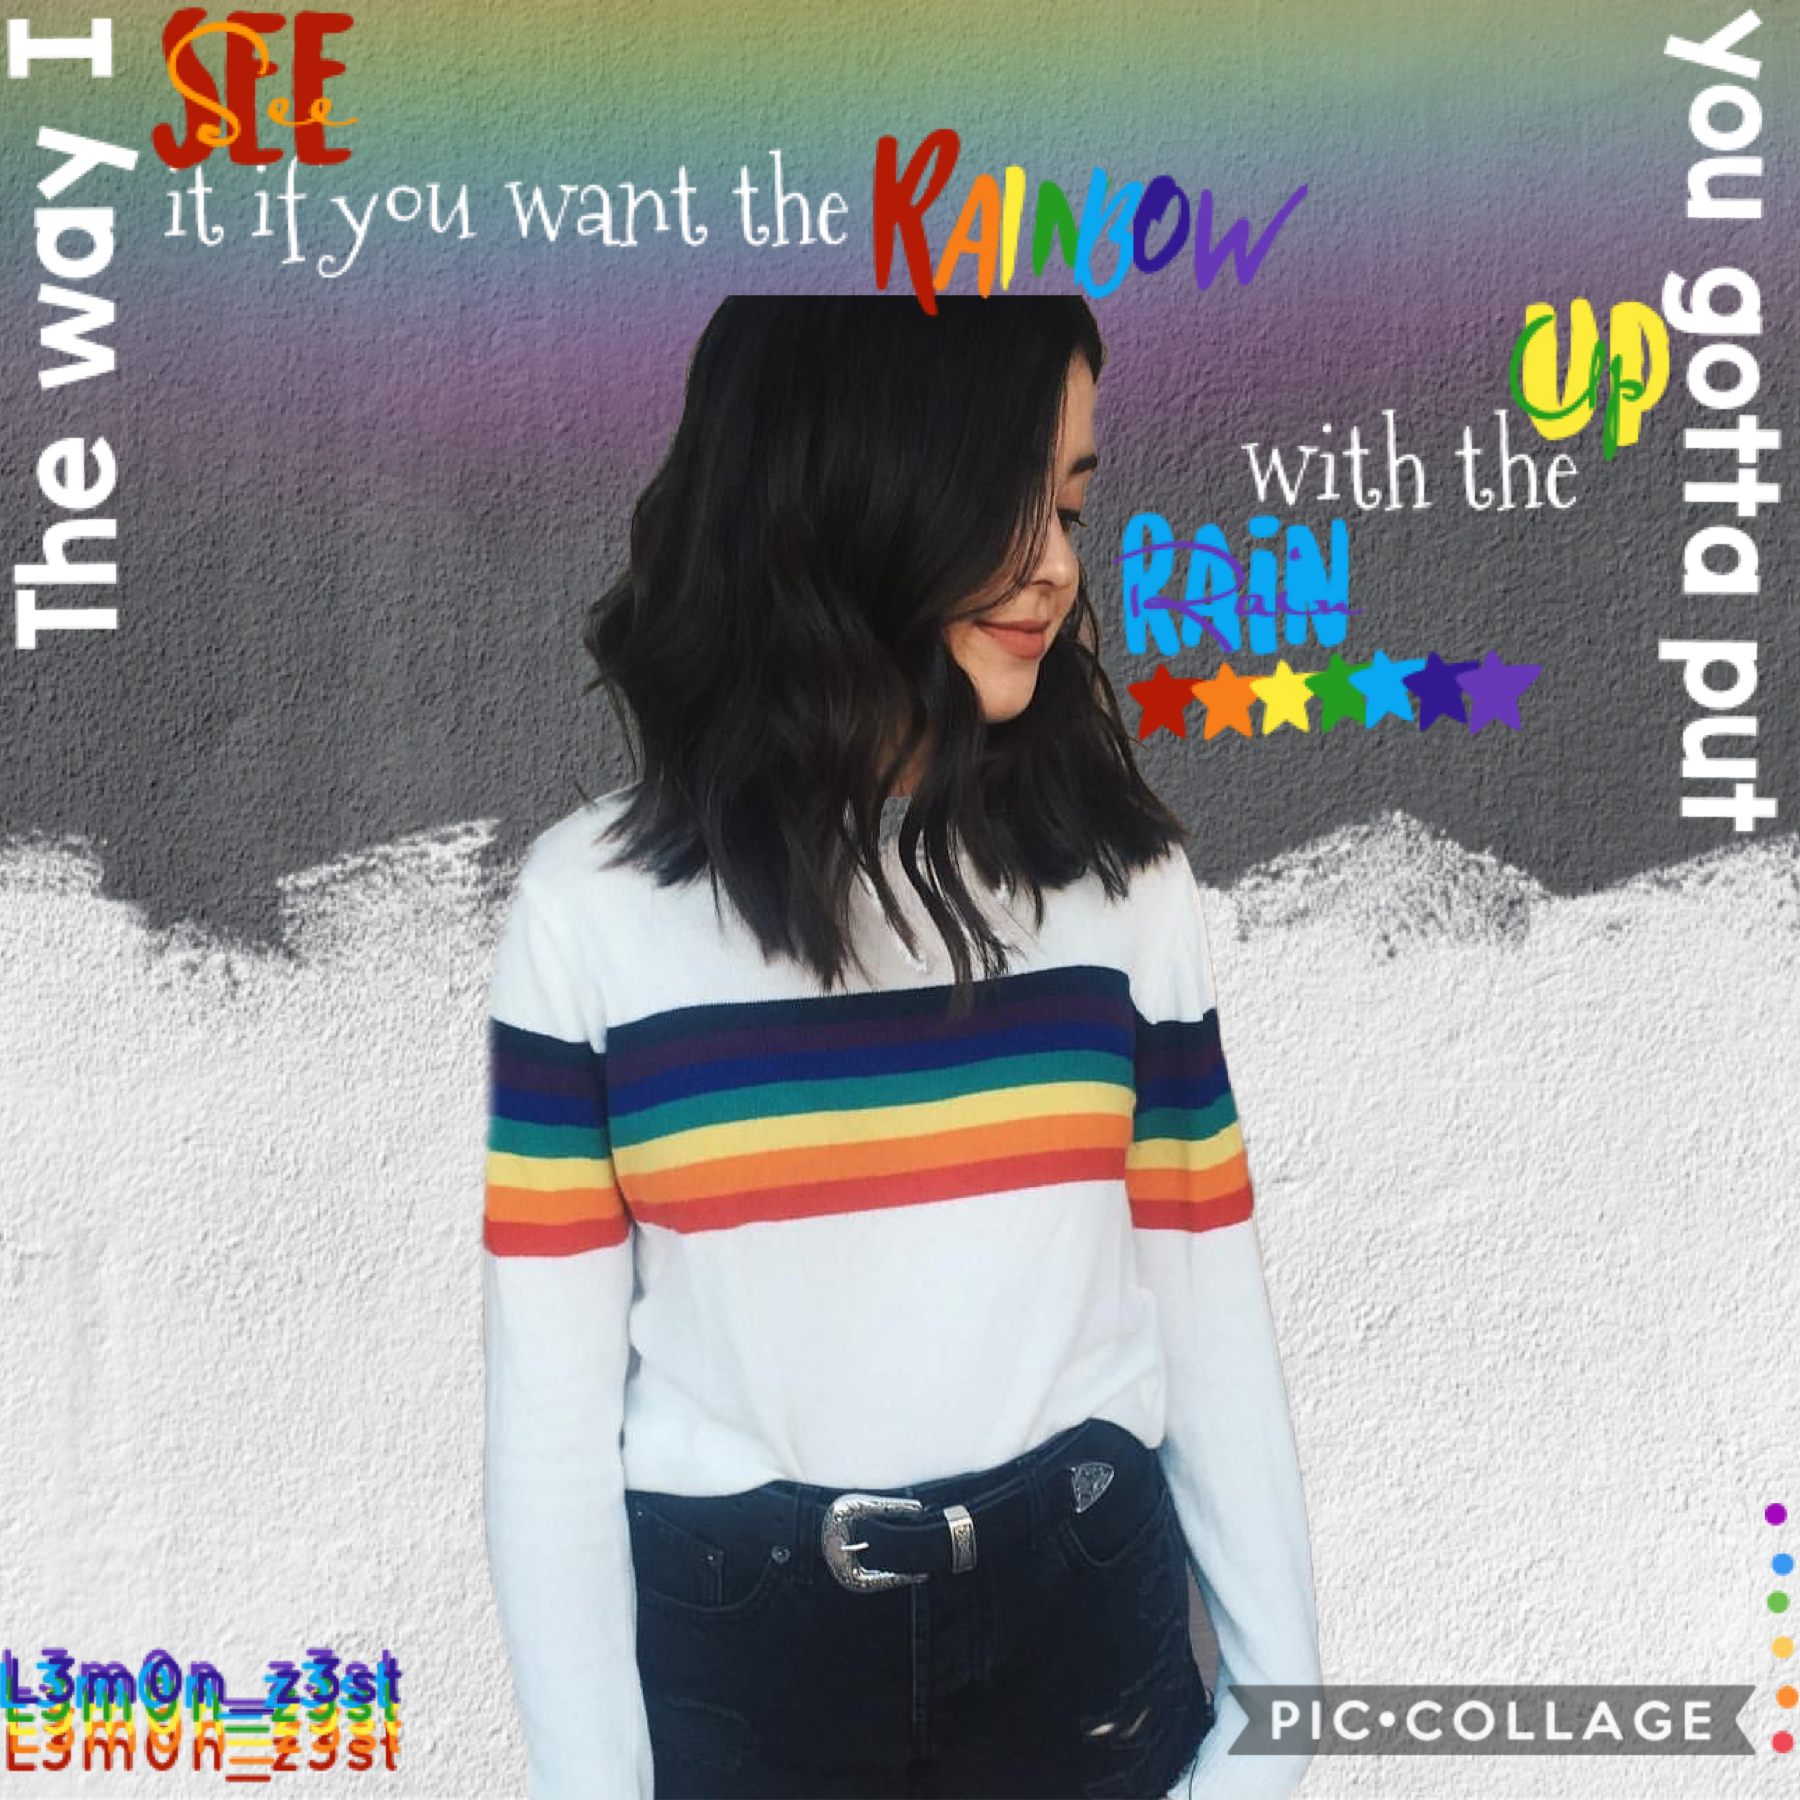 sorry if it’s a little hard to read but it says: “the way i see it if you want the rainbow you gotta put up with the rain 🌈